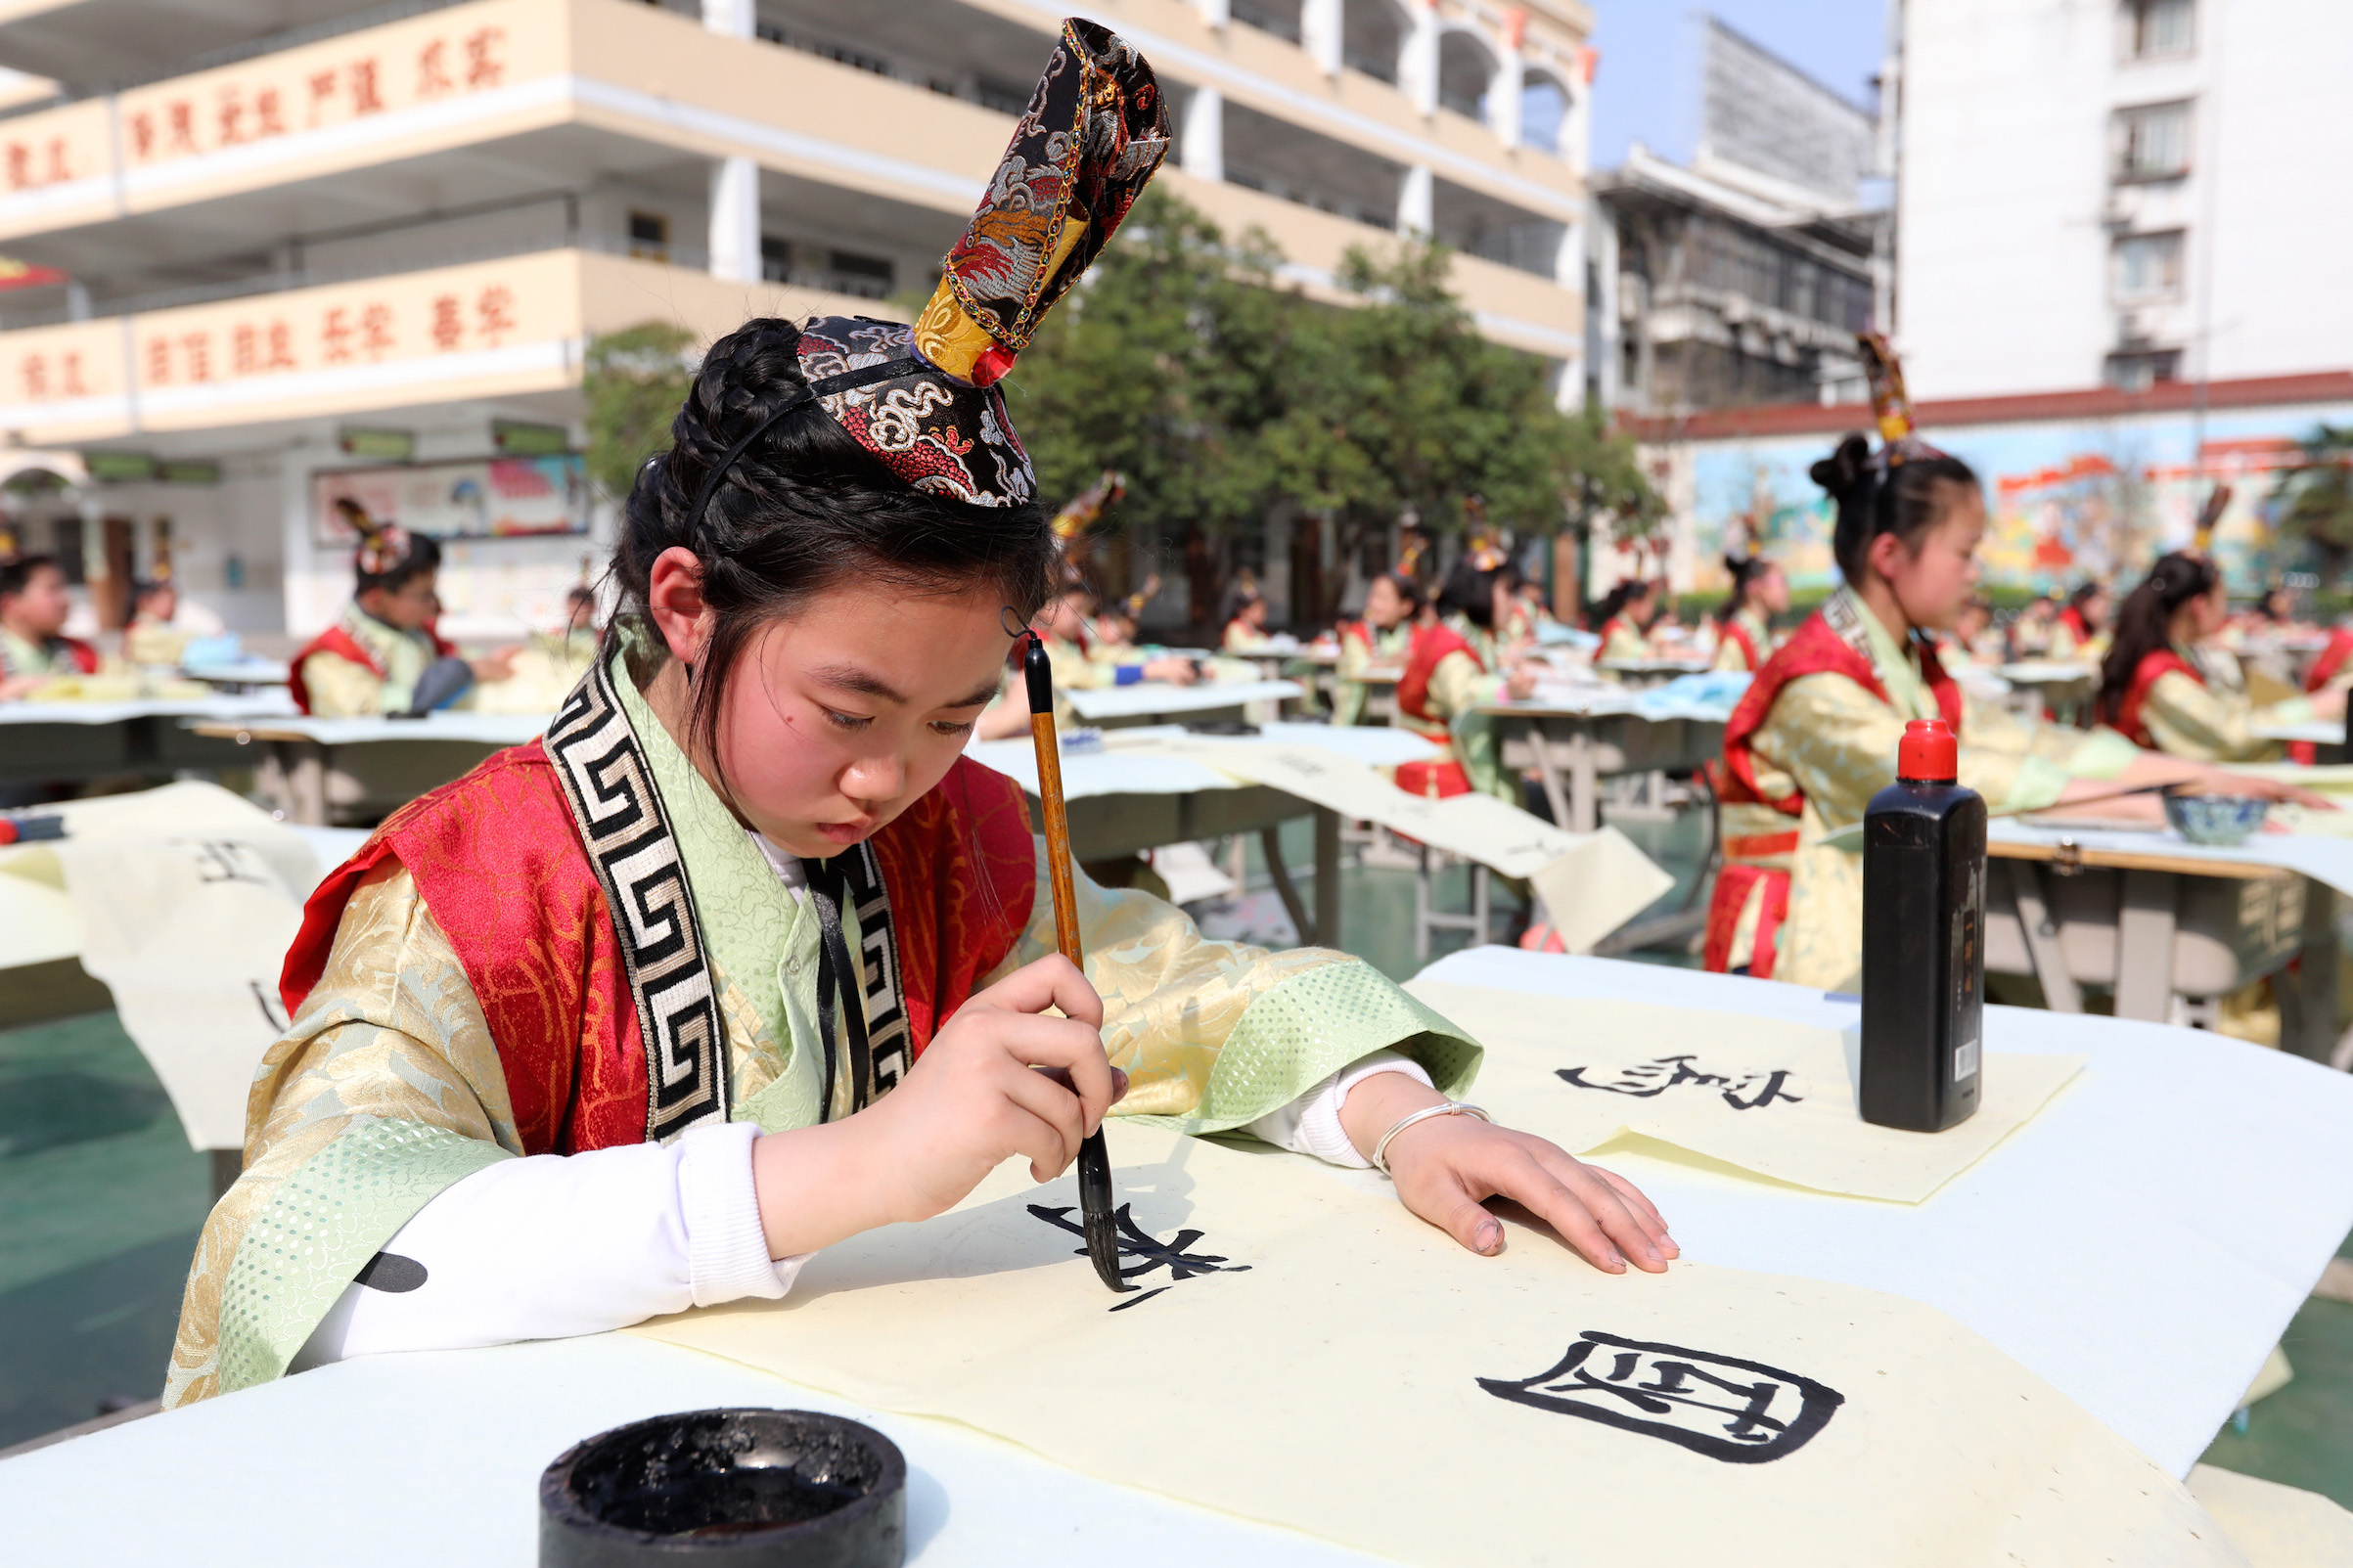 Students of Huaibei City Gucheng Road Primary School attend a calligraphy competition on March 30, 2018, in Huaibei, Anhui Province of China. (VCG / Getty Images)